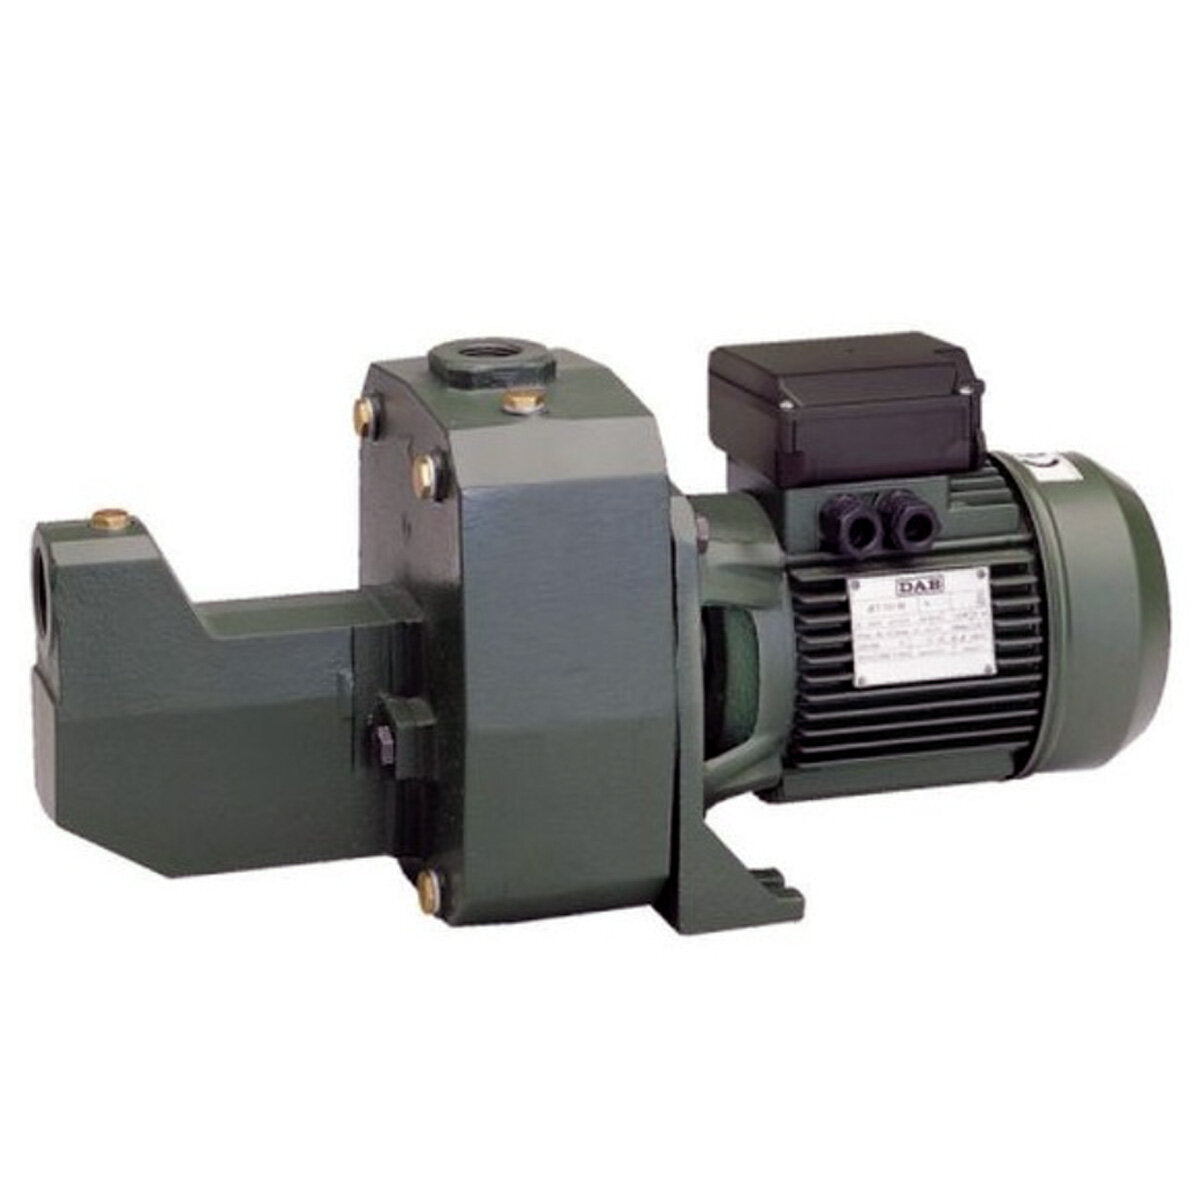 DAB JET 151 M IE2 1.1 kW/1.5 HP single-phase self-priming centrifugal electric pump